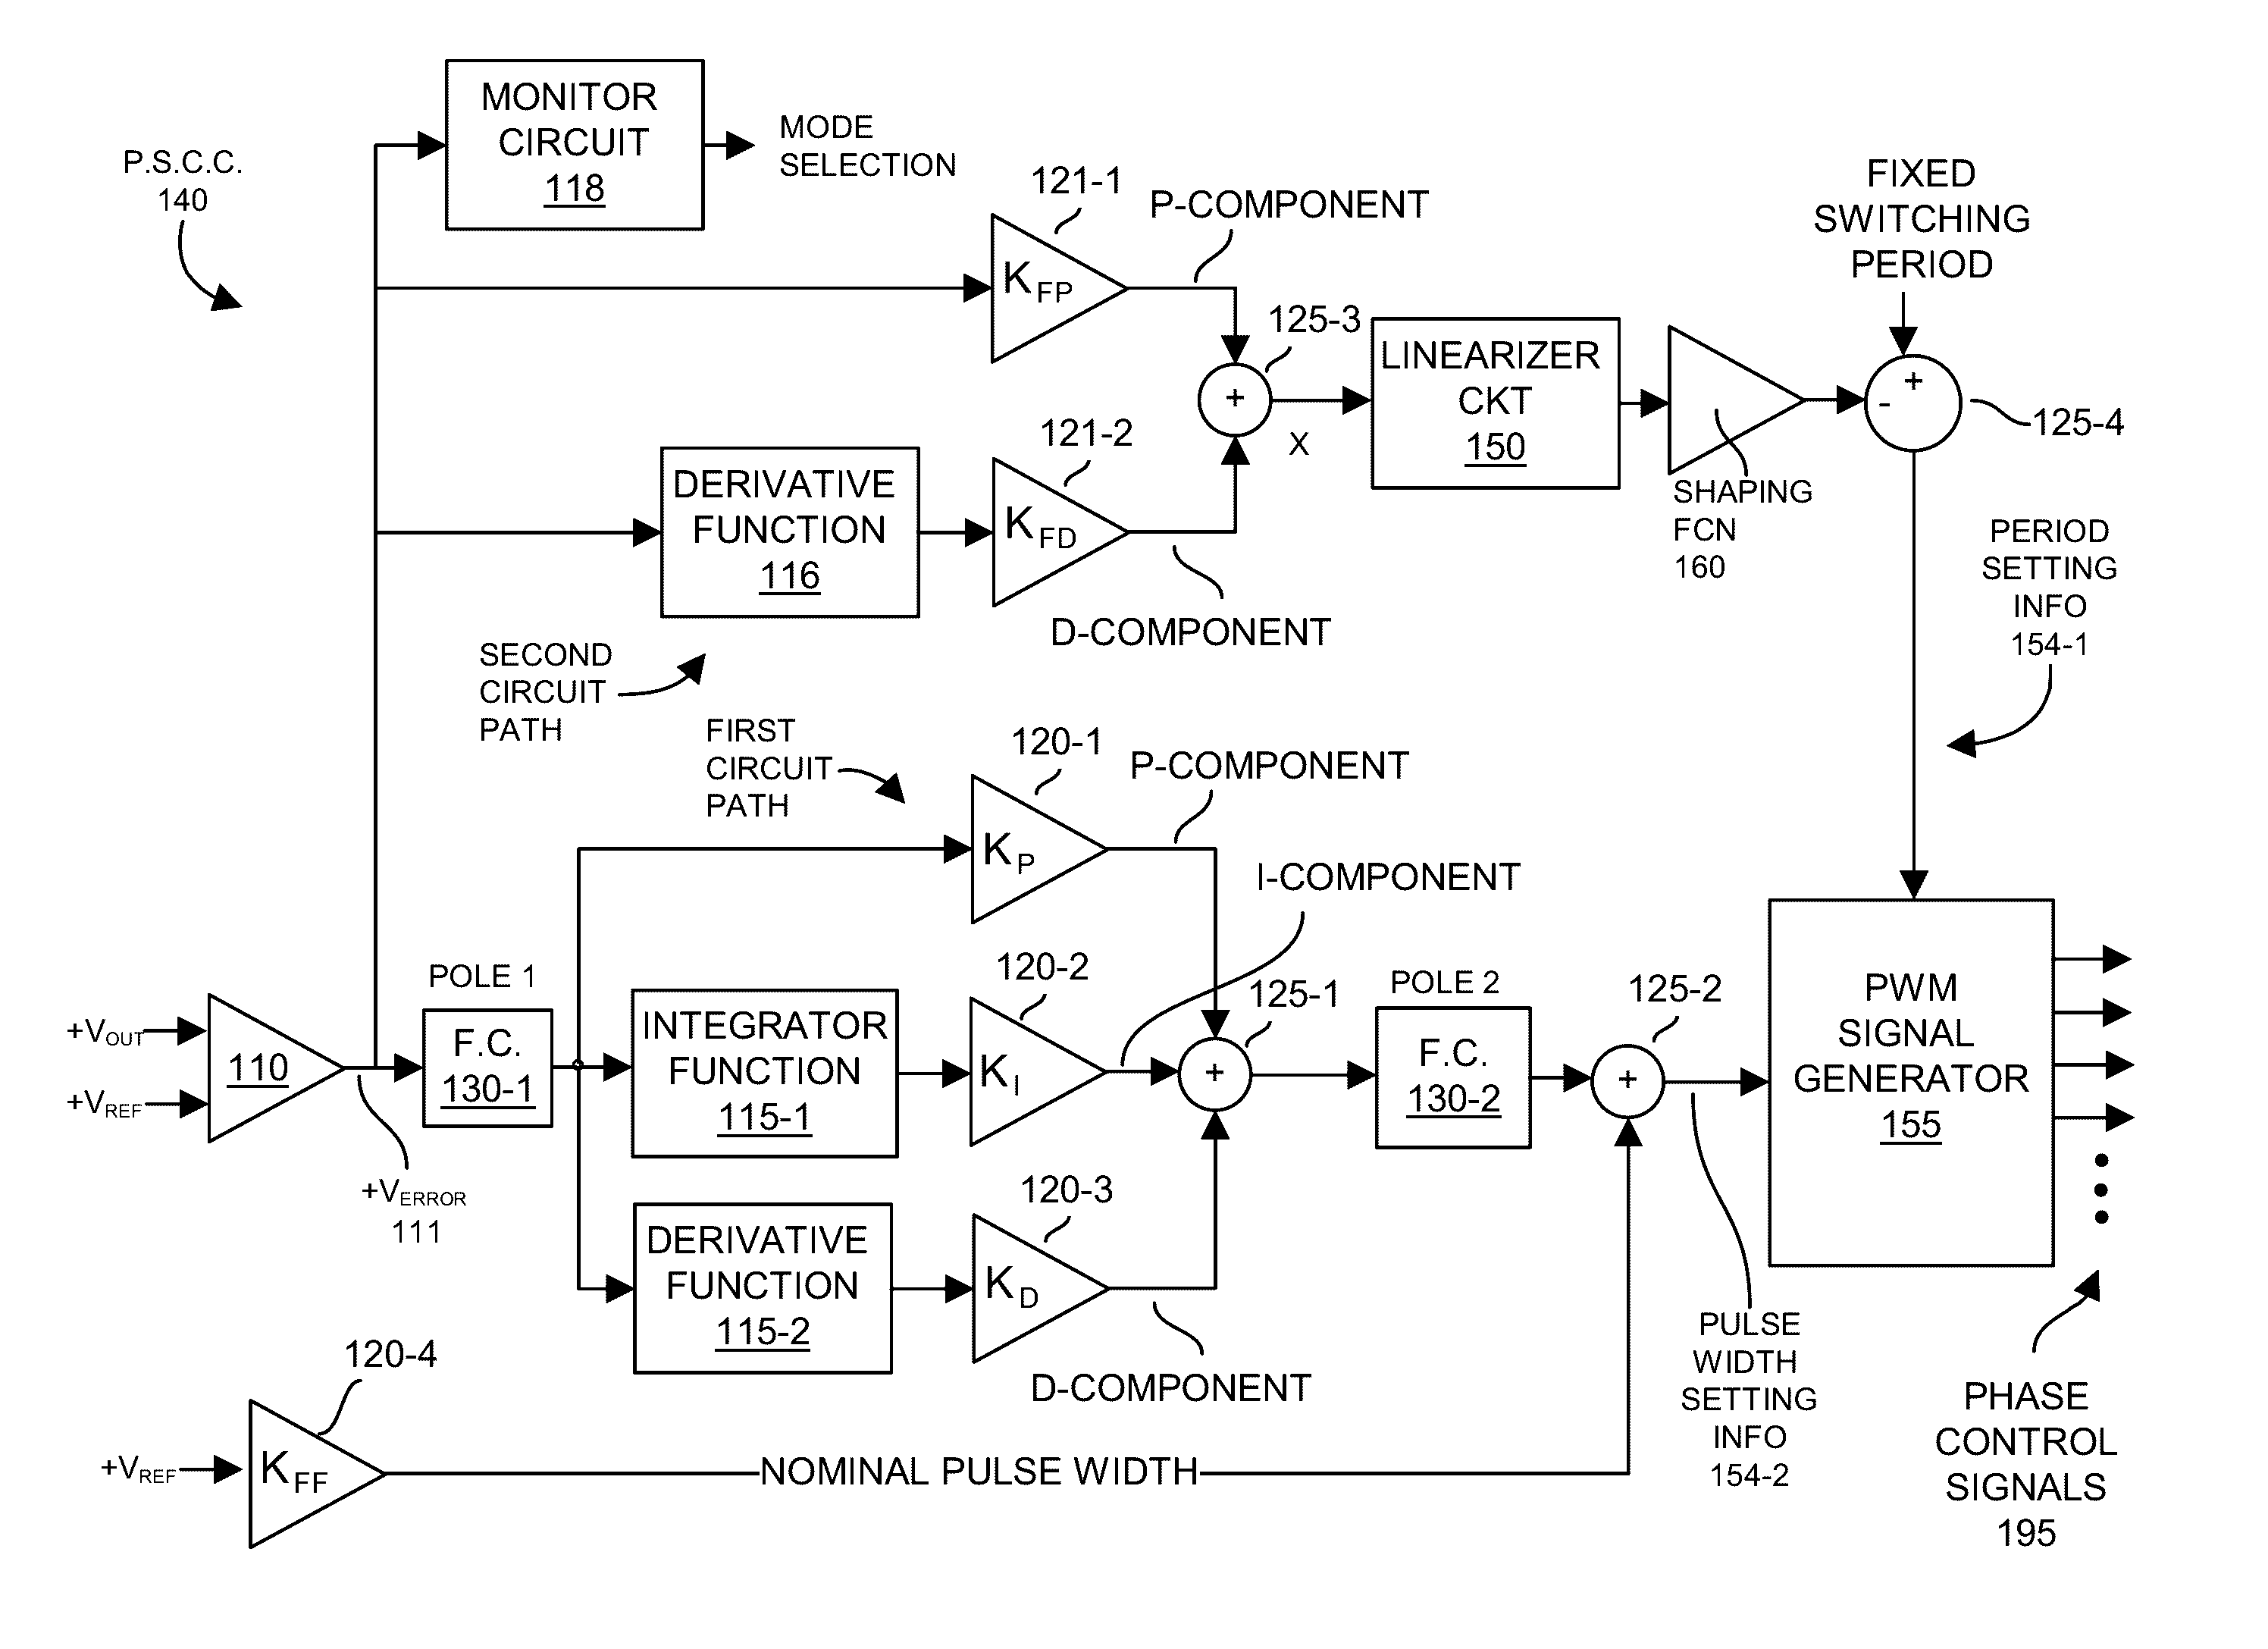 Power supply circuitry and adaptive transient control